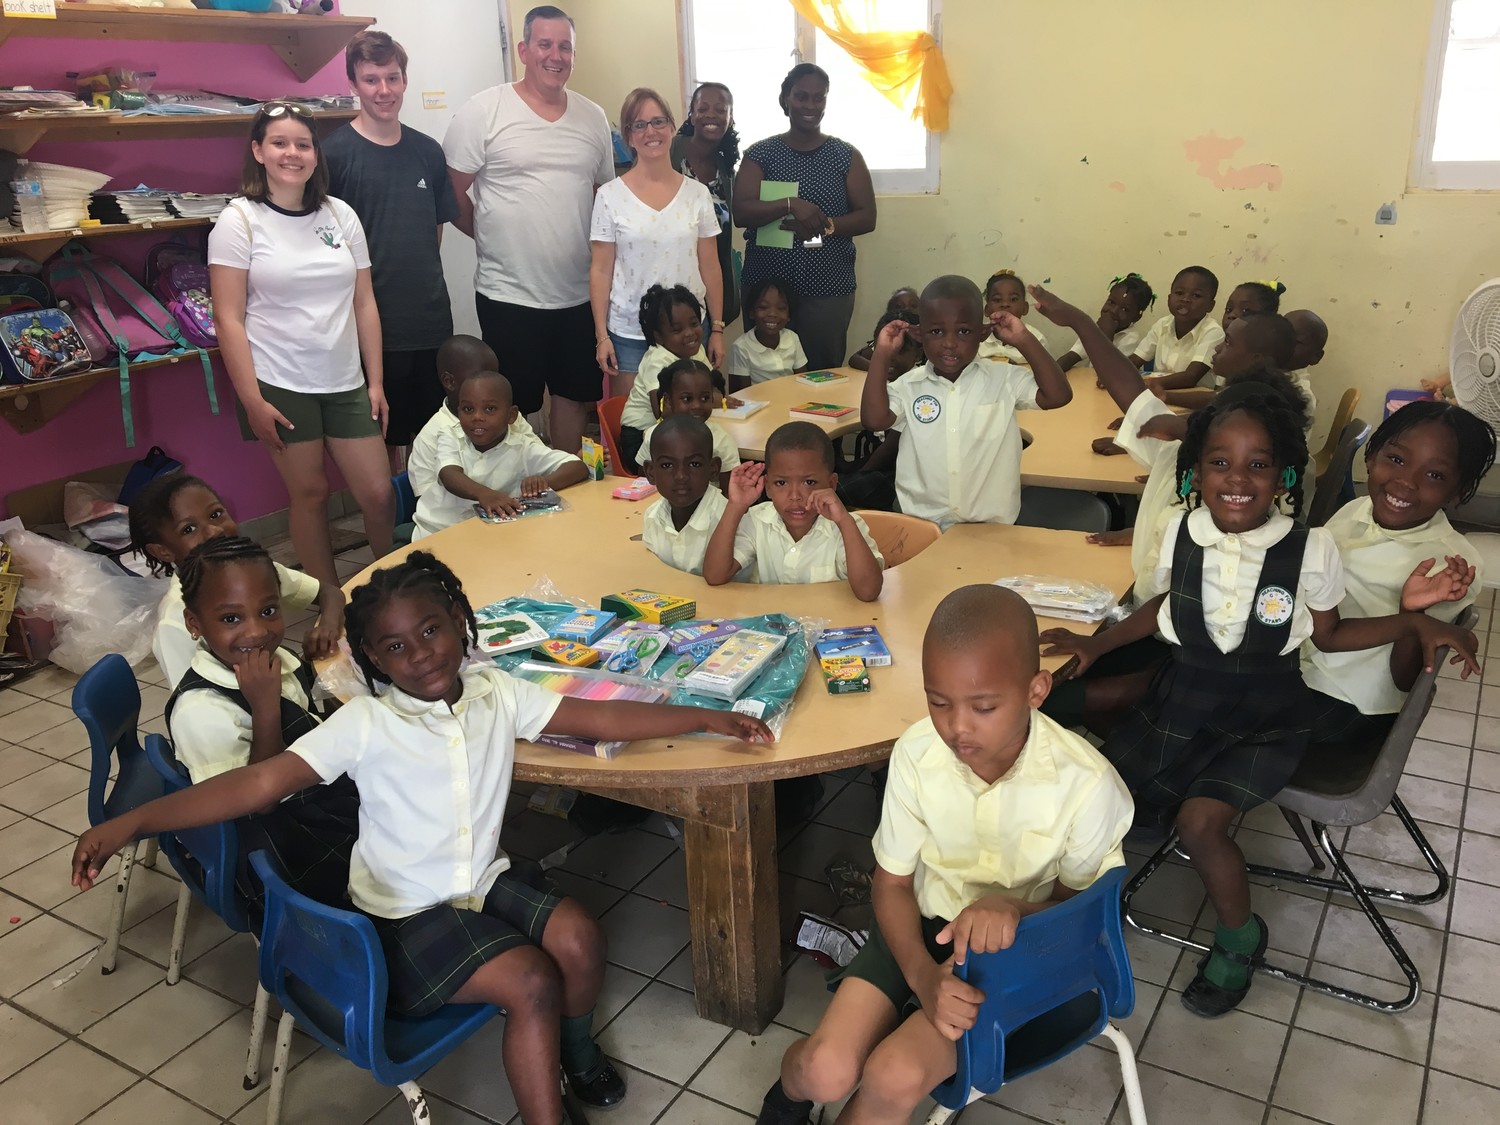 The Urban family, of Seaford, took several pieces of luggage filled with school supplies to Turks and Caicos in June to help local public schools, including the Enid Capron Primary School.